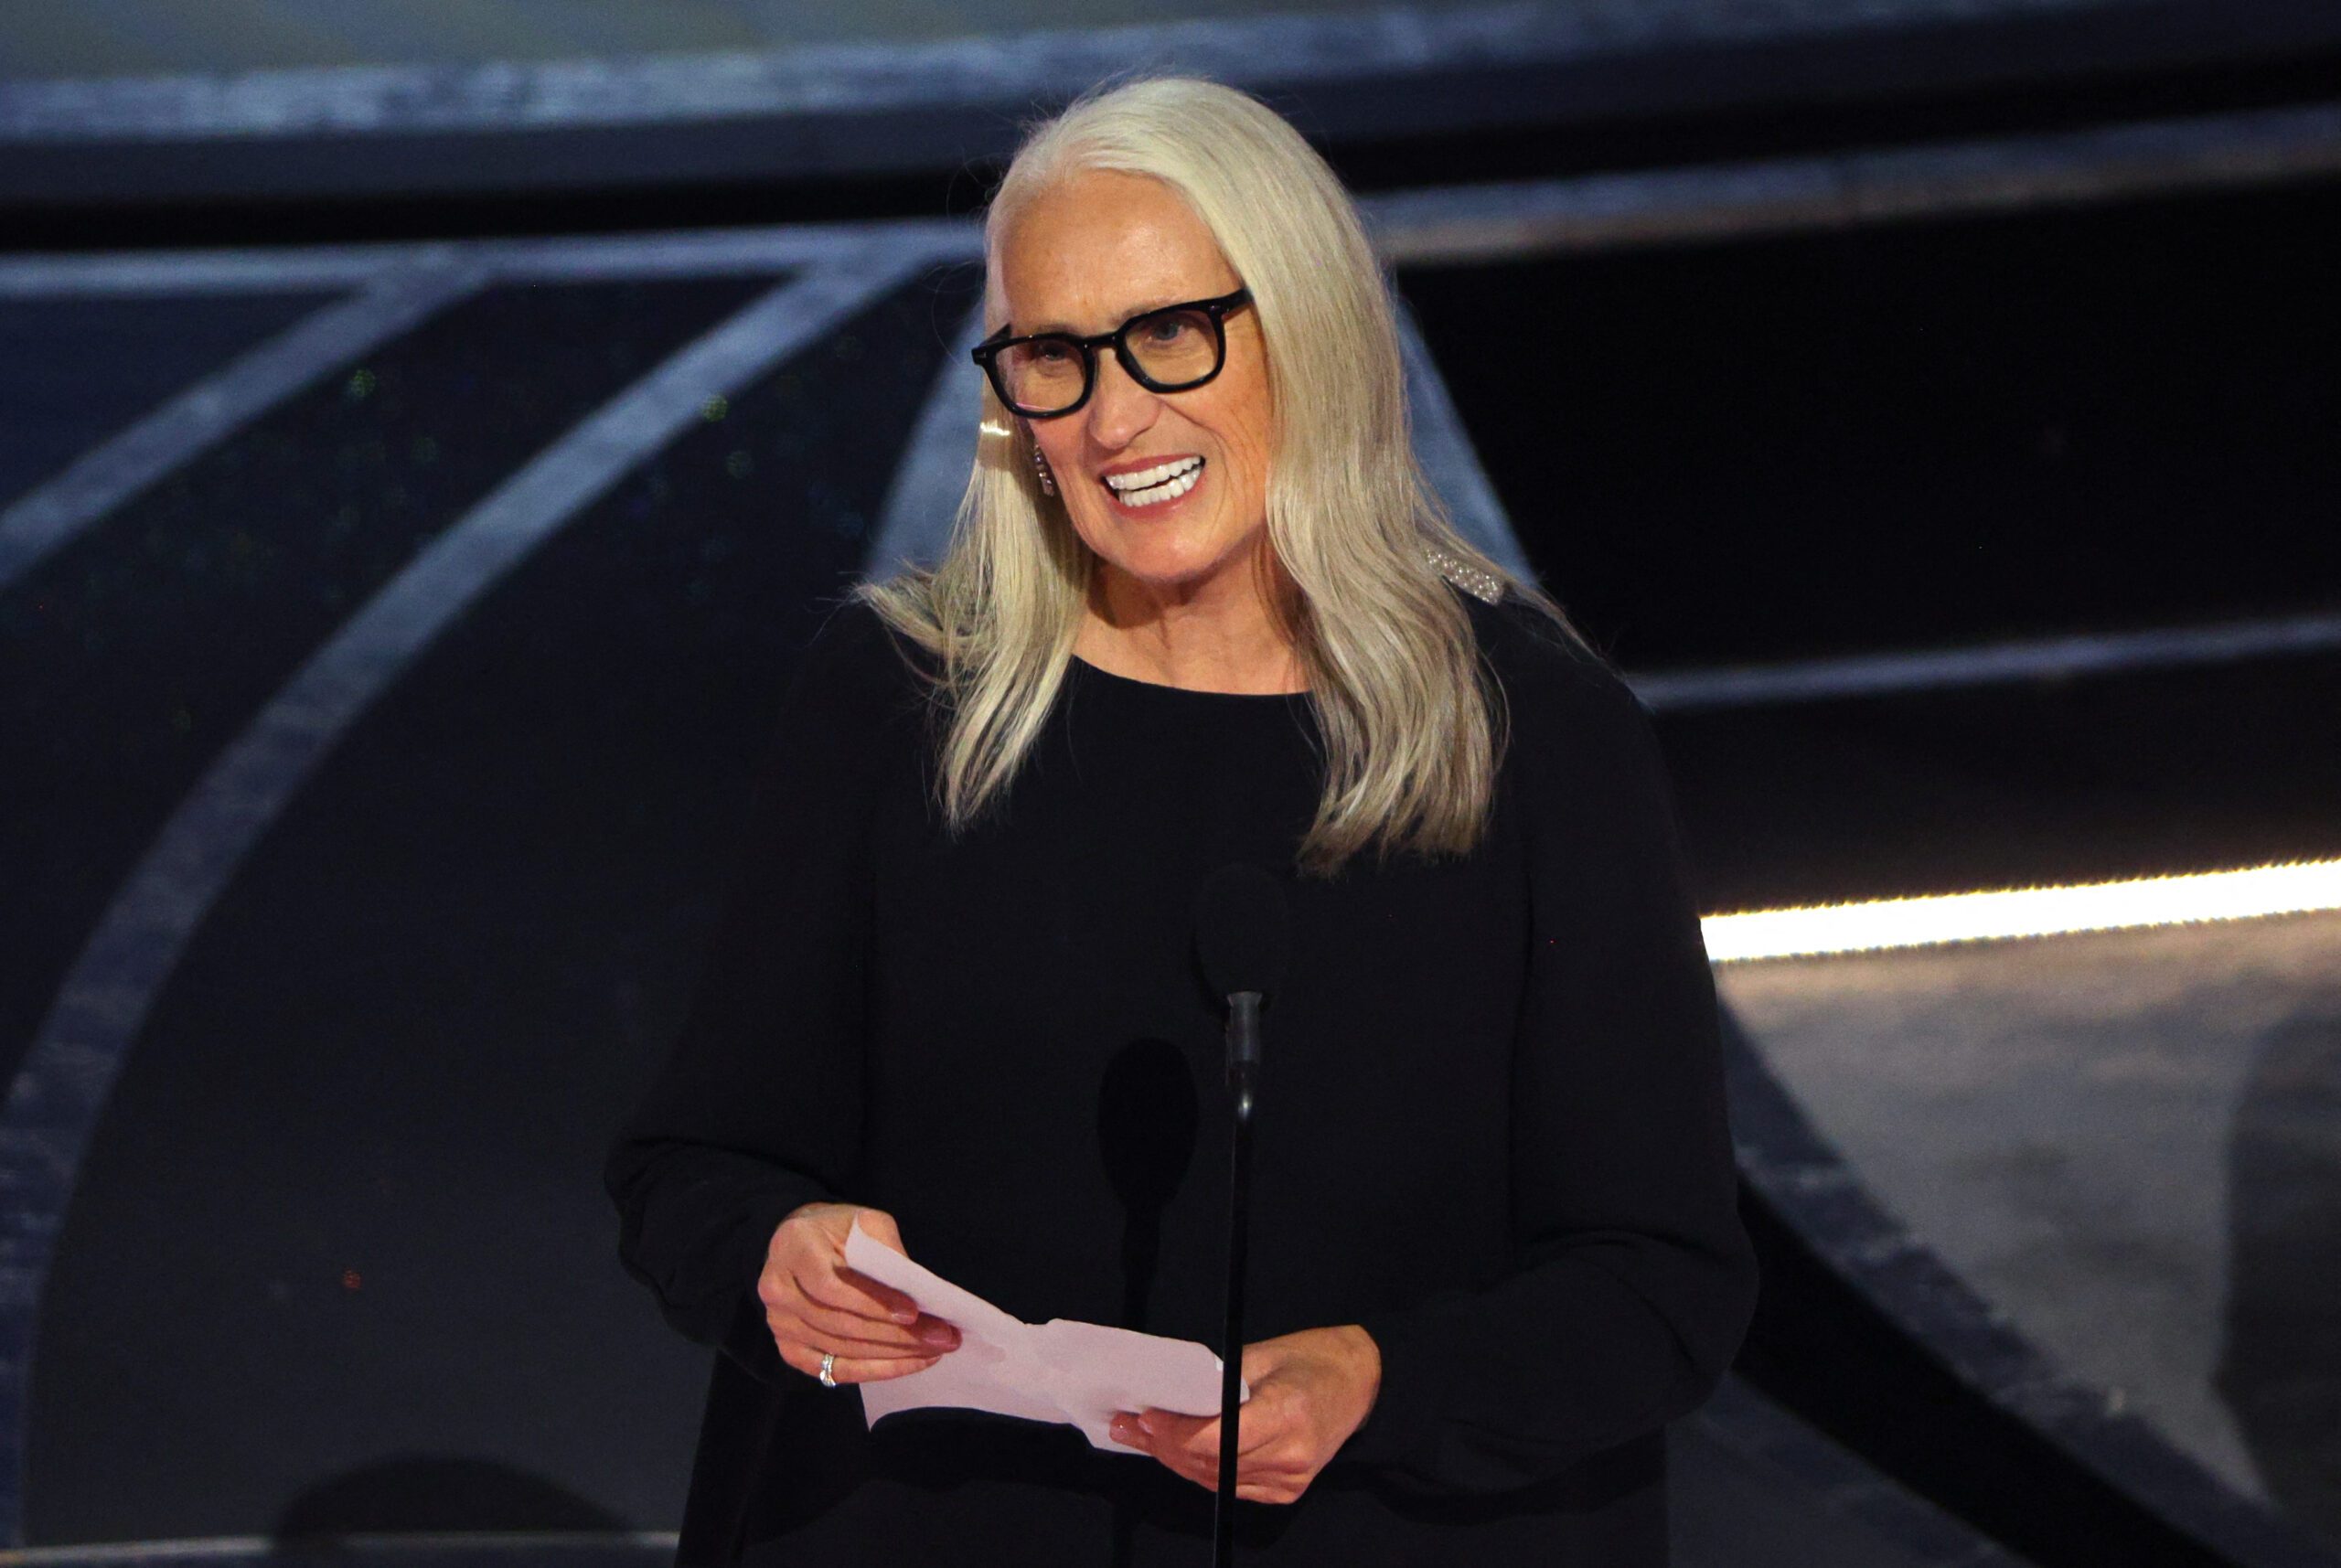 Jane Campion wins best director Oscar for ‘Power of the Dog’